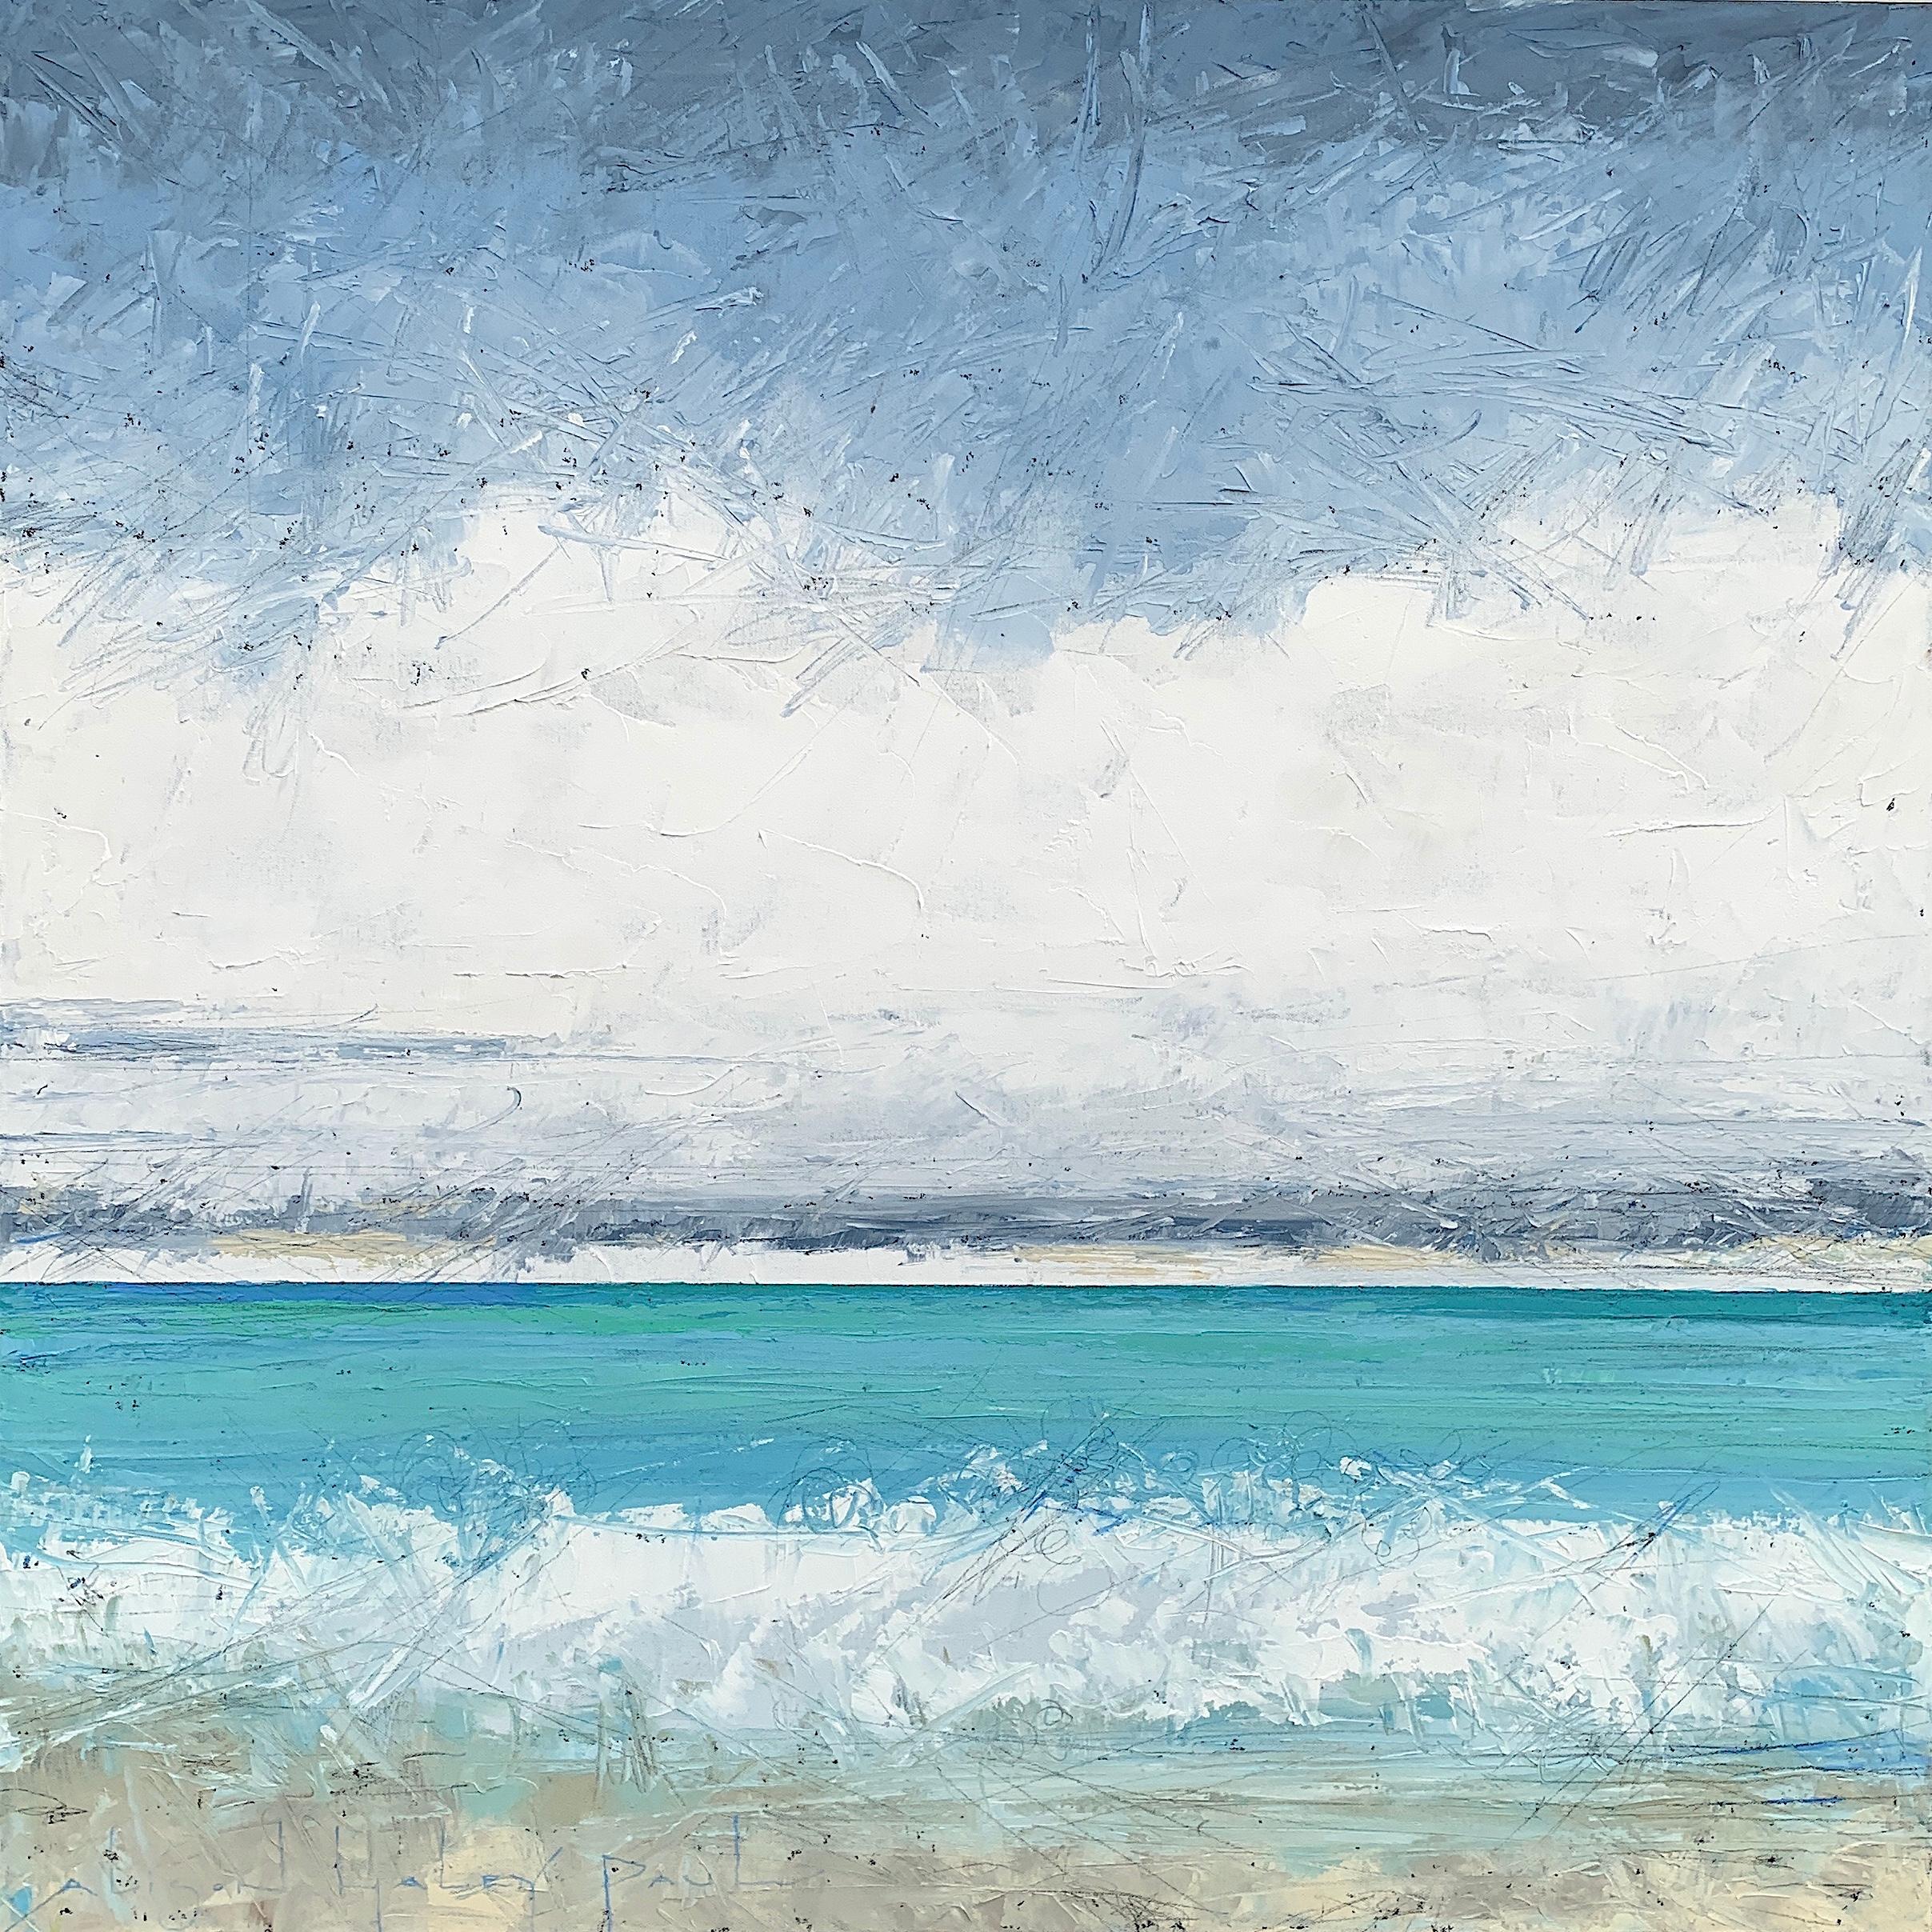 Alison Haley Paul Landscape Painting - "Layering" Impasto mixed media painting of a turquoise ocean beneath cloudy sky